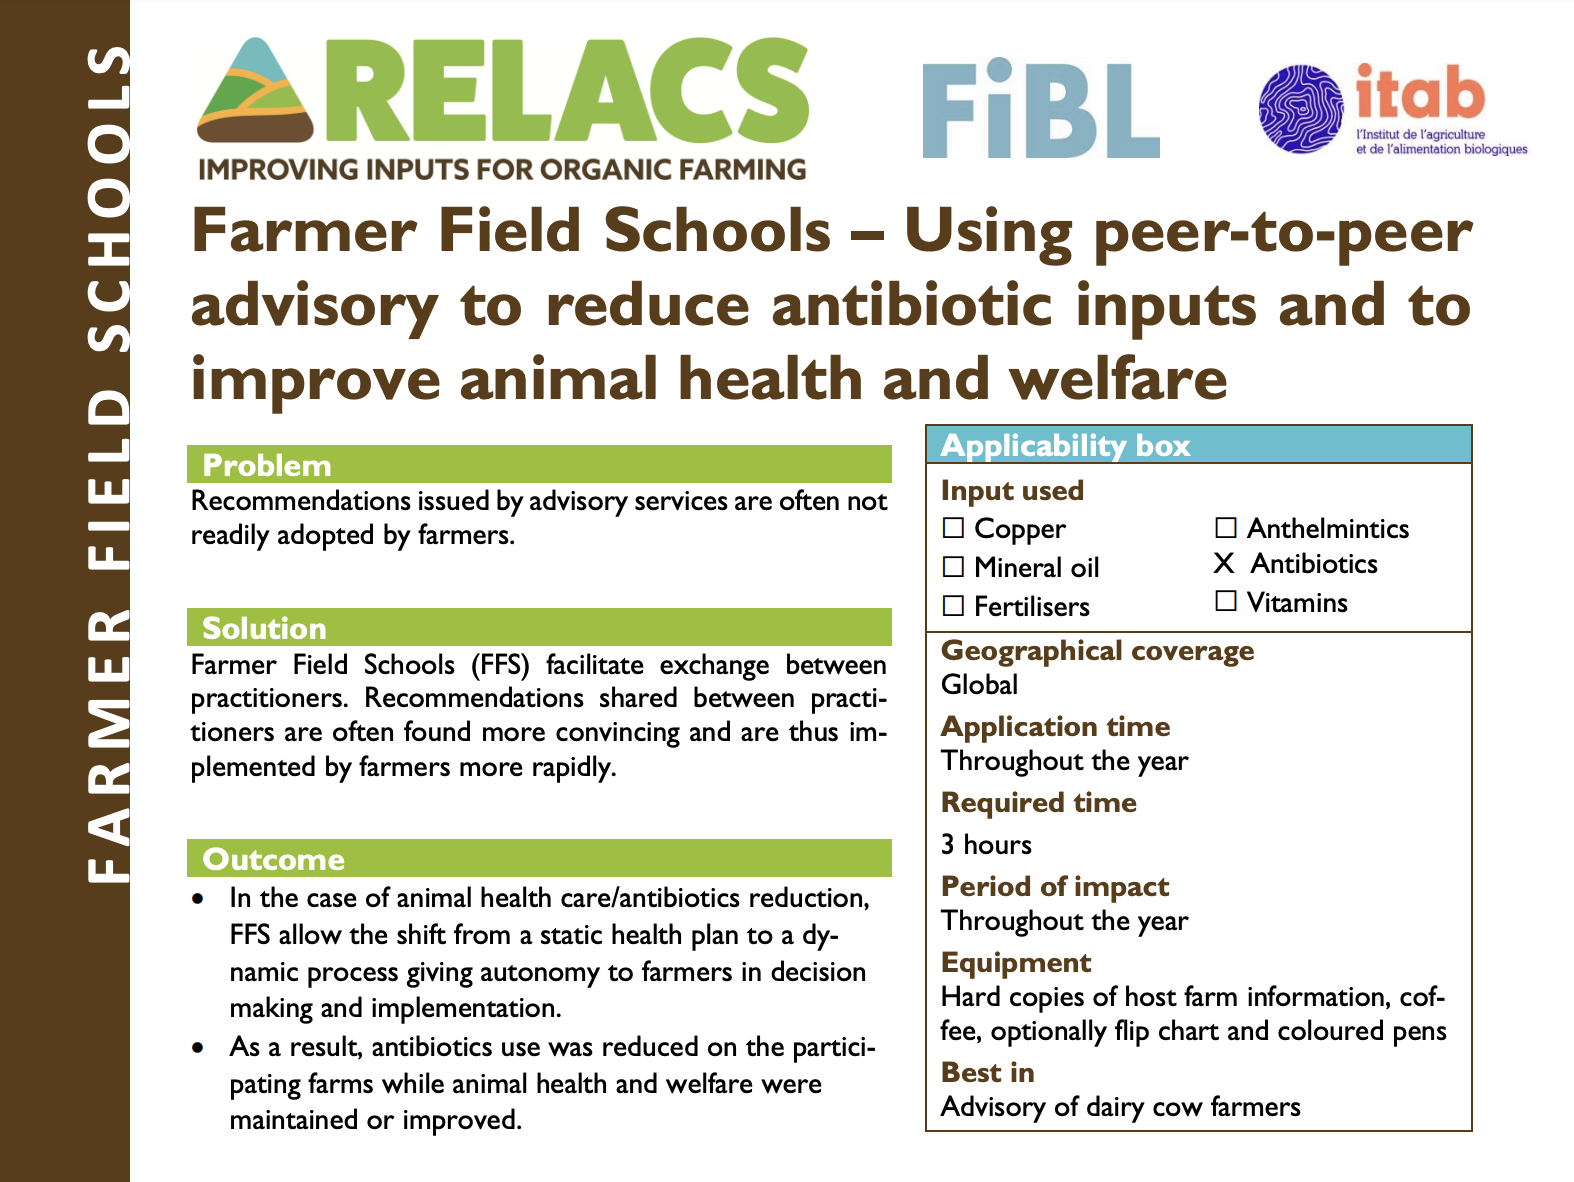 Farmer Field Schools – Using peer-to-peer advisory to reduce antibiotic inputs and to improve animal health and welfare (RELACS Practice Abstract)